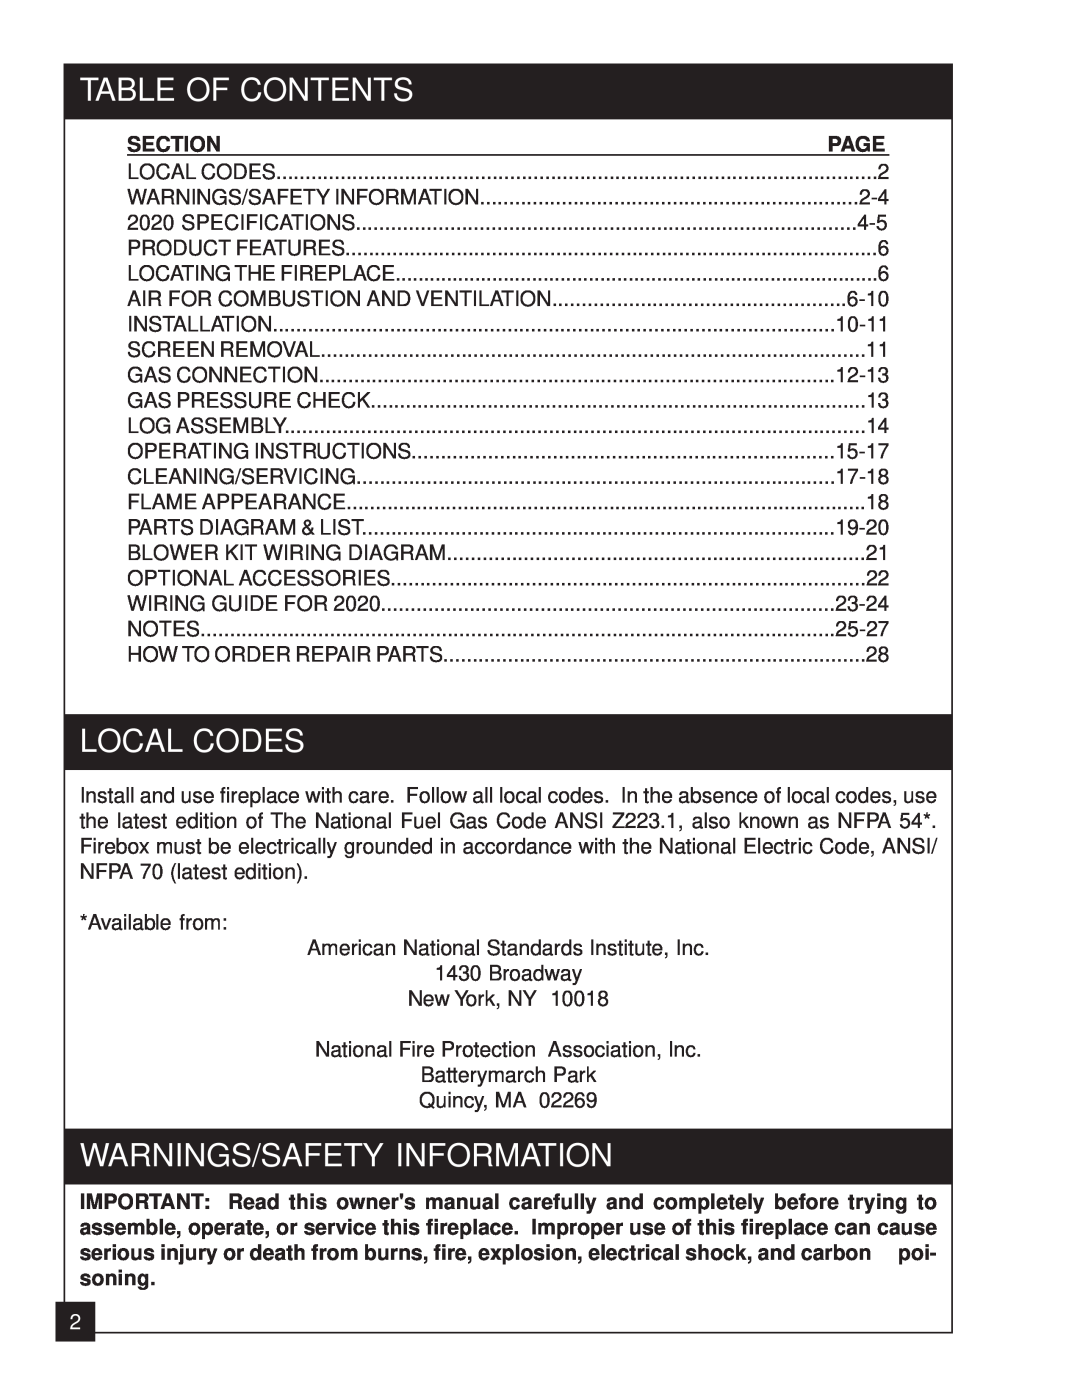 United States Stove 2020L installation manual Table Of Contents, Local Codes, Warnings/Safety Information, Section 